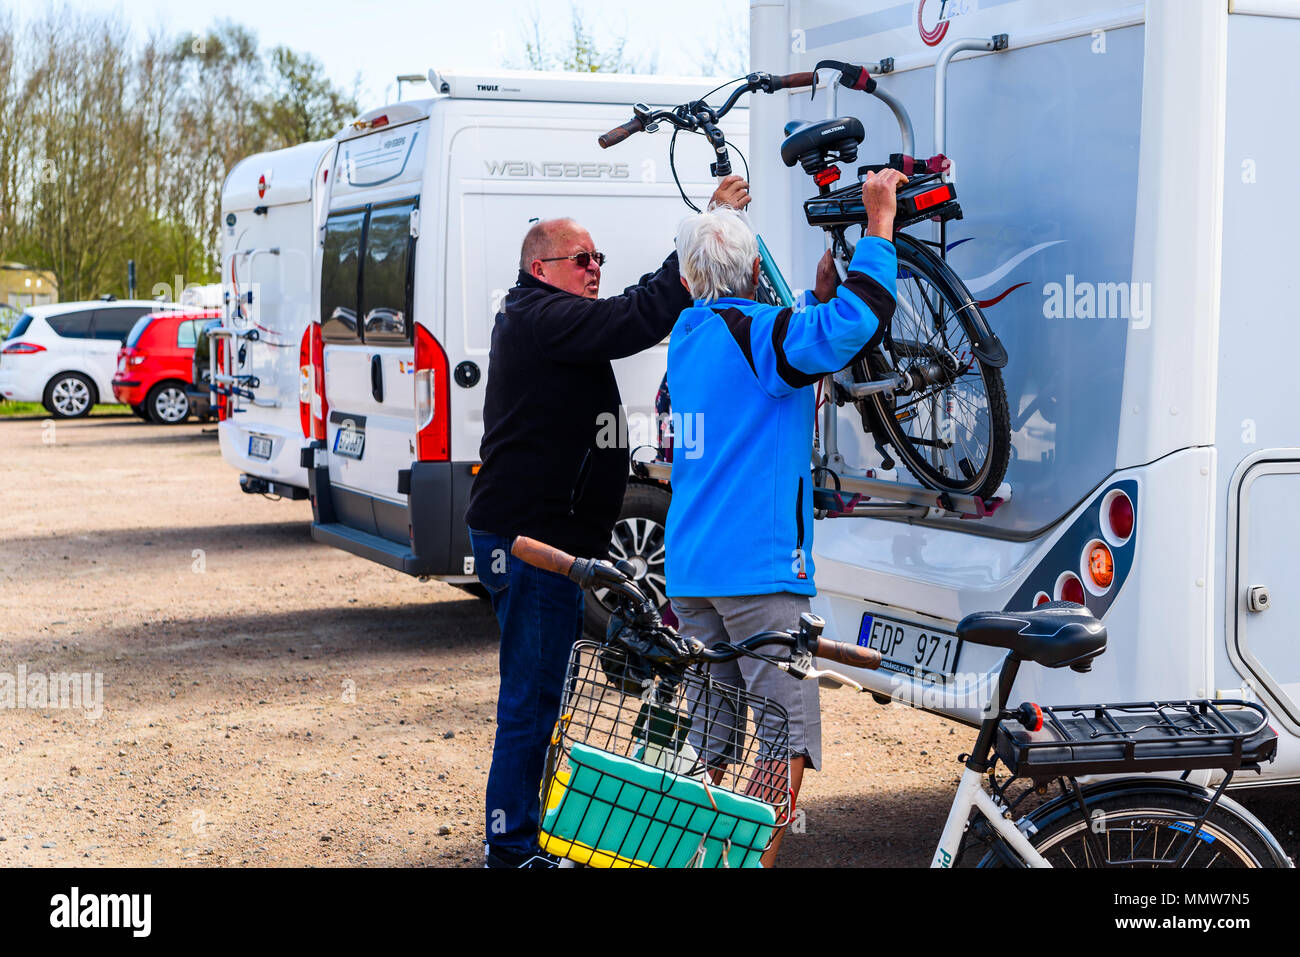 Raa harbor, Helsingborg, Sweden - April 29, 2018: Documentary of everyday life and place. Senior couple loading a bicycle onto the end of a camper whi Stock Photo